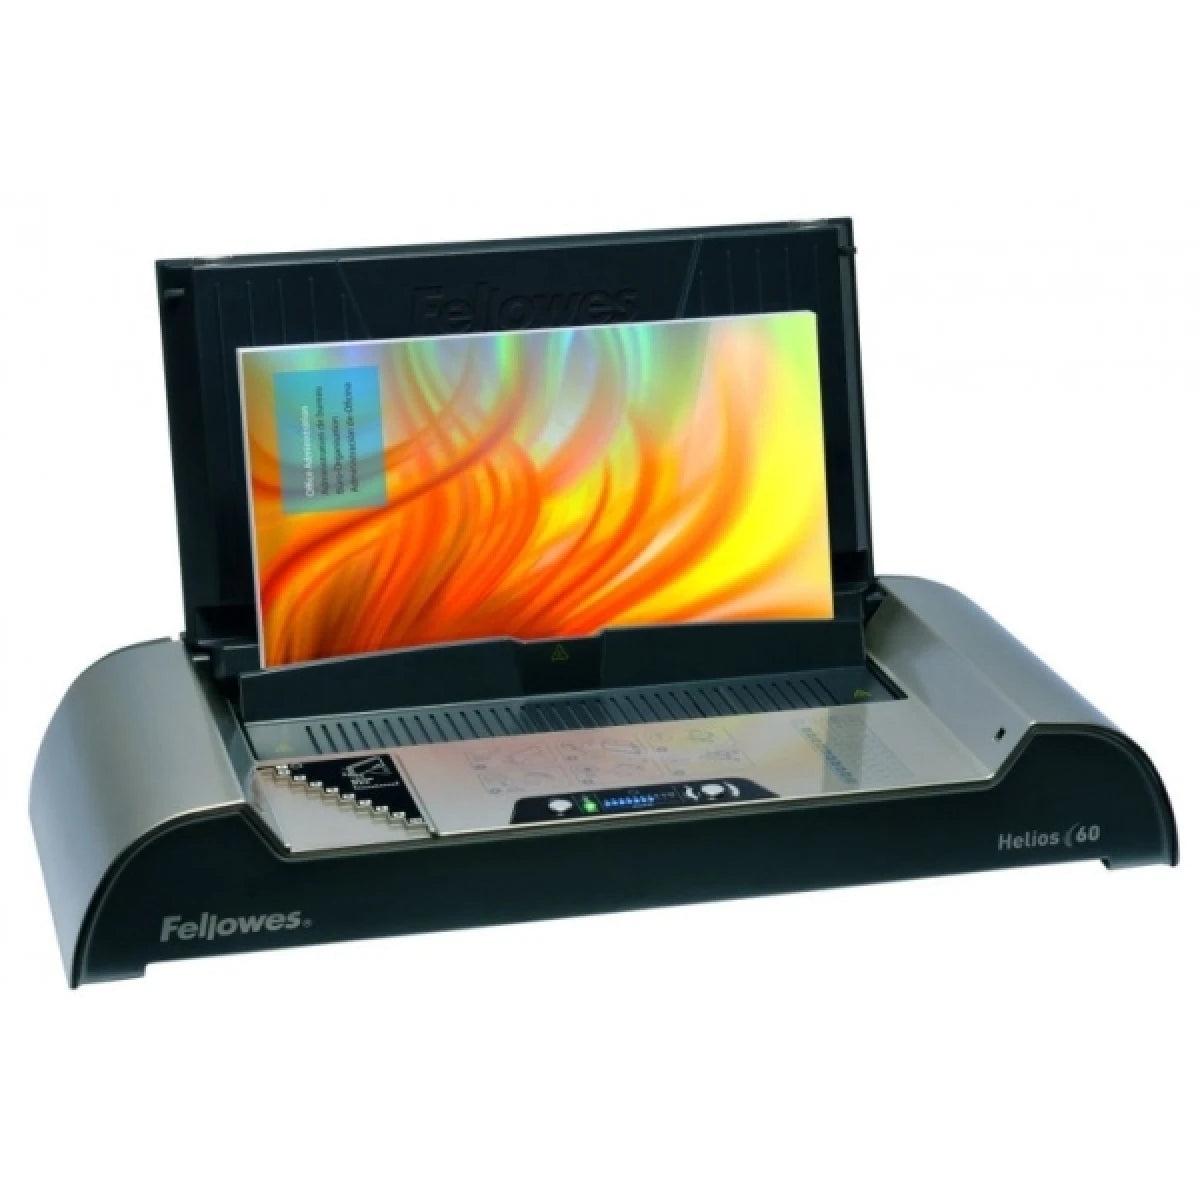 Fellowes Helios 30 Thermal Binder / Multiple Documents Up to 300 sheets